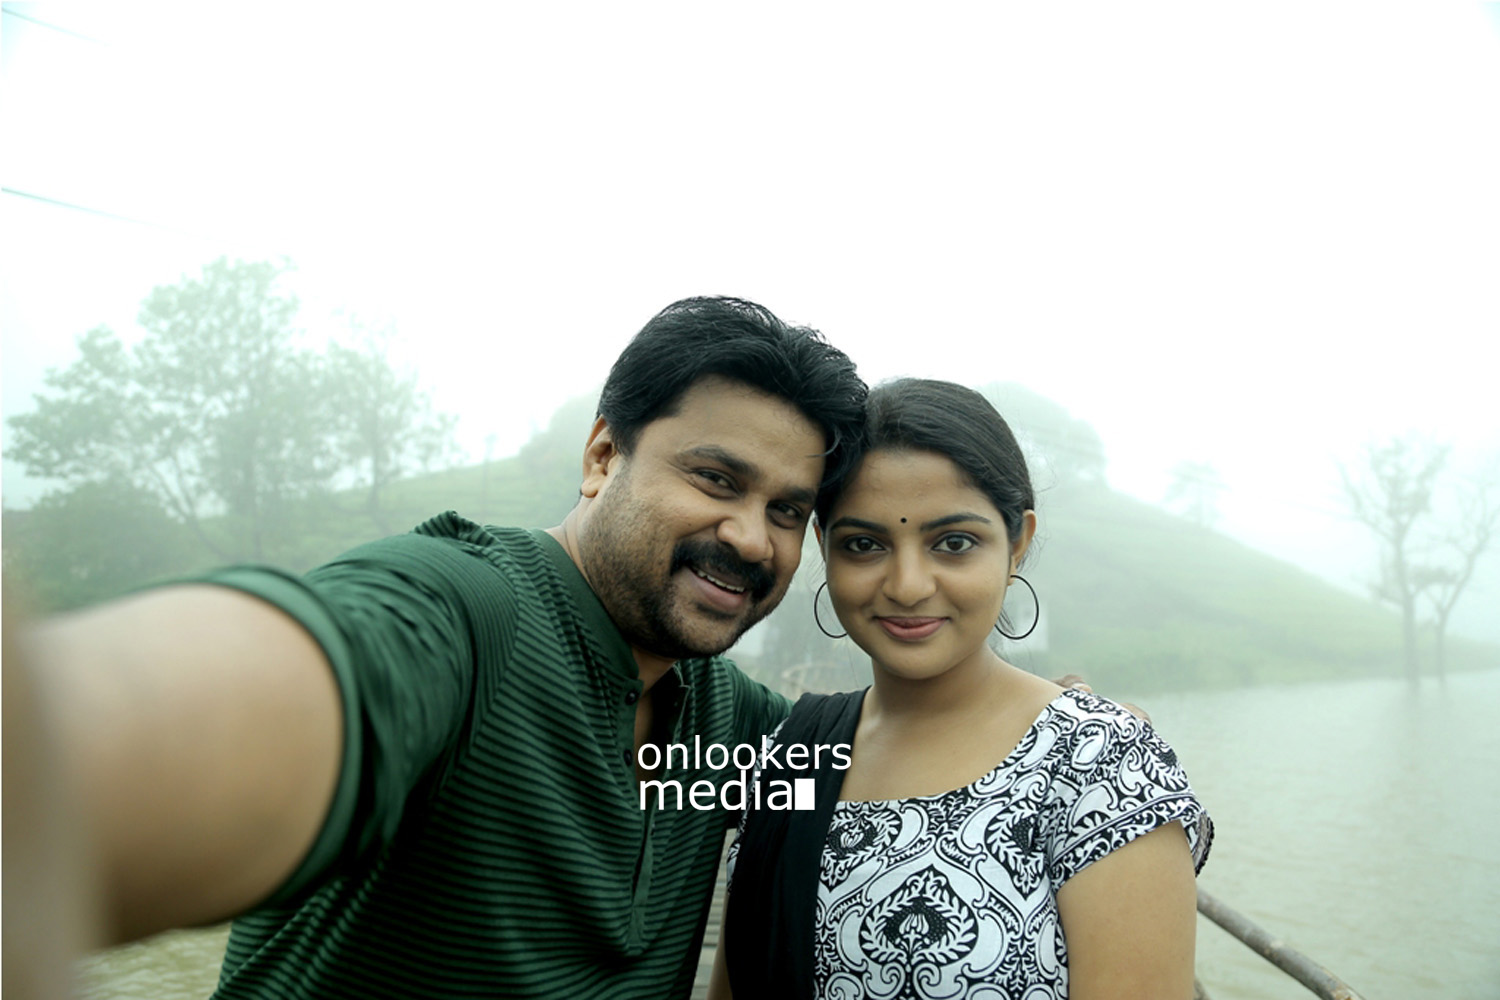 http://onlookersmedia.in/wp-content/uploads/2015/07/Dileep-and-Nikhila-Vimal-in-Love-24X7-Stills-Images-Photos-71.jpg